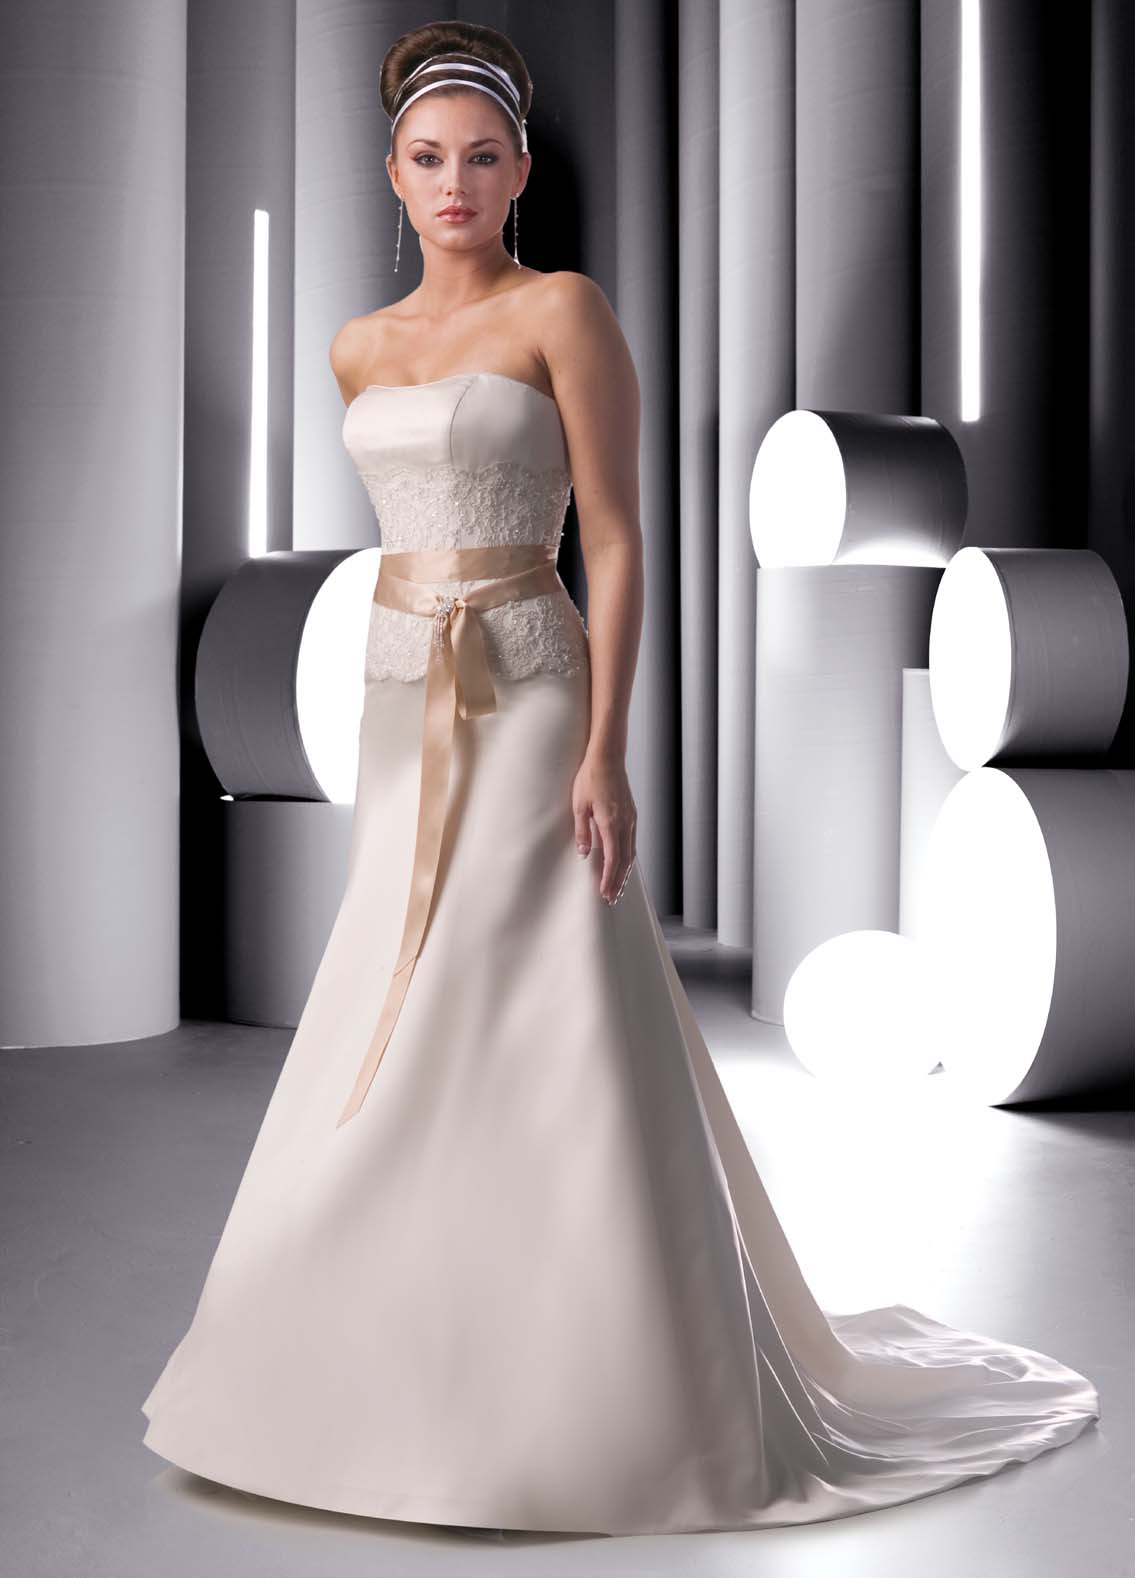 strapless wedding gown with sash